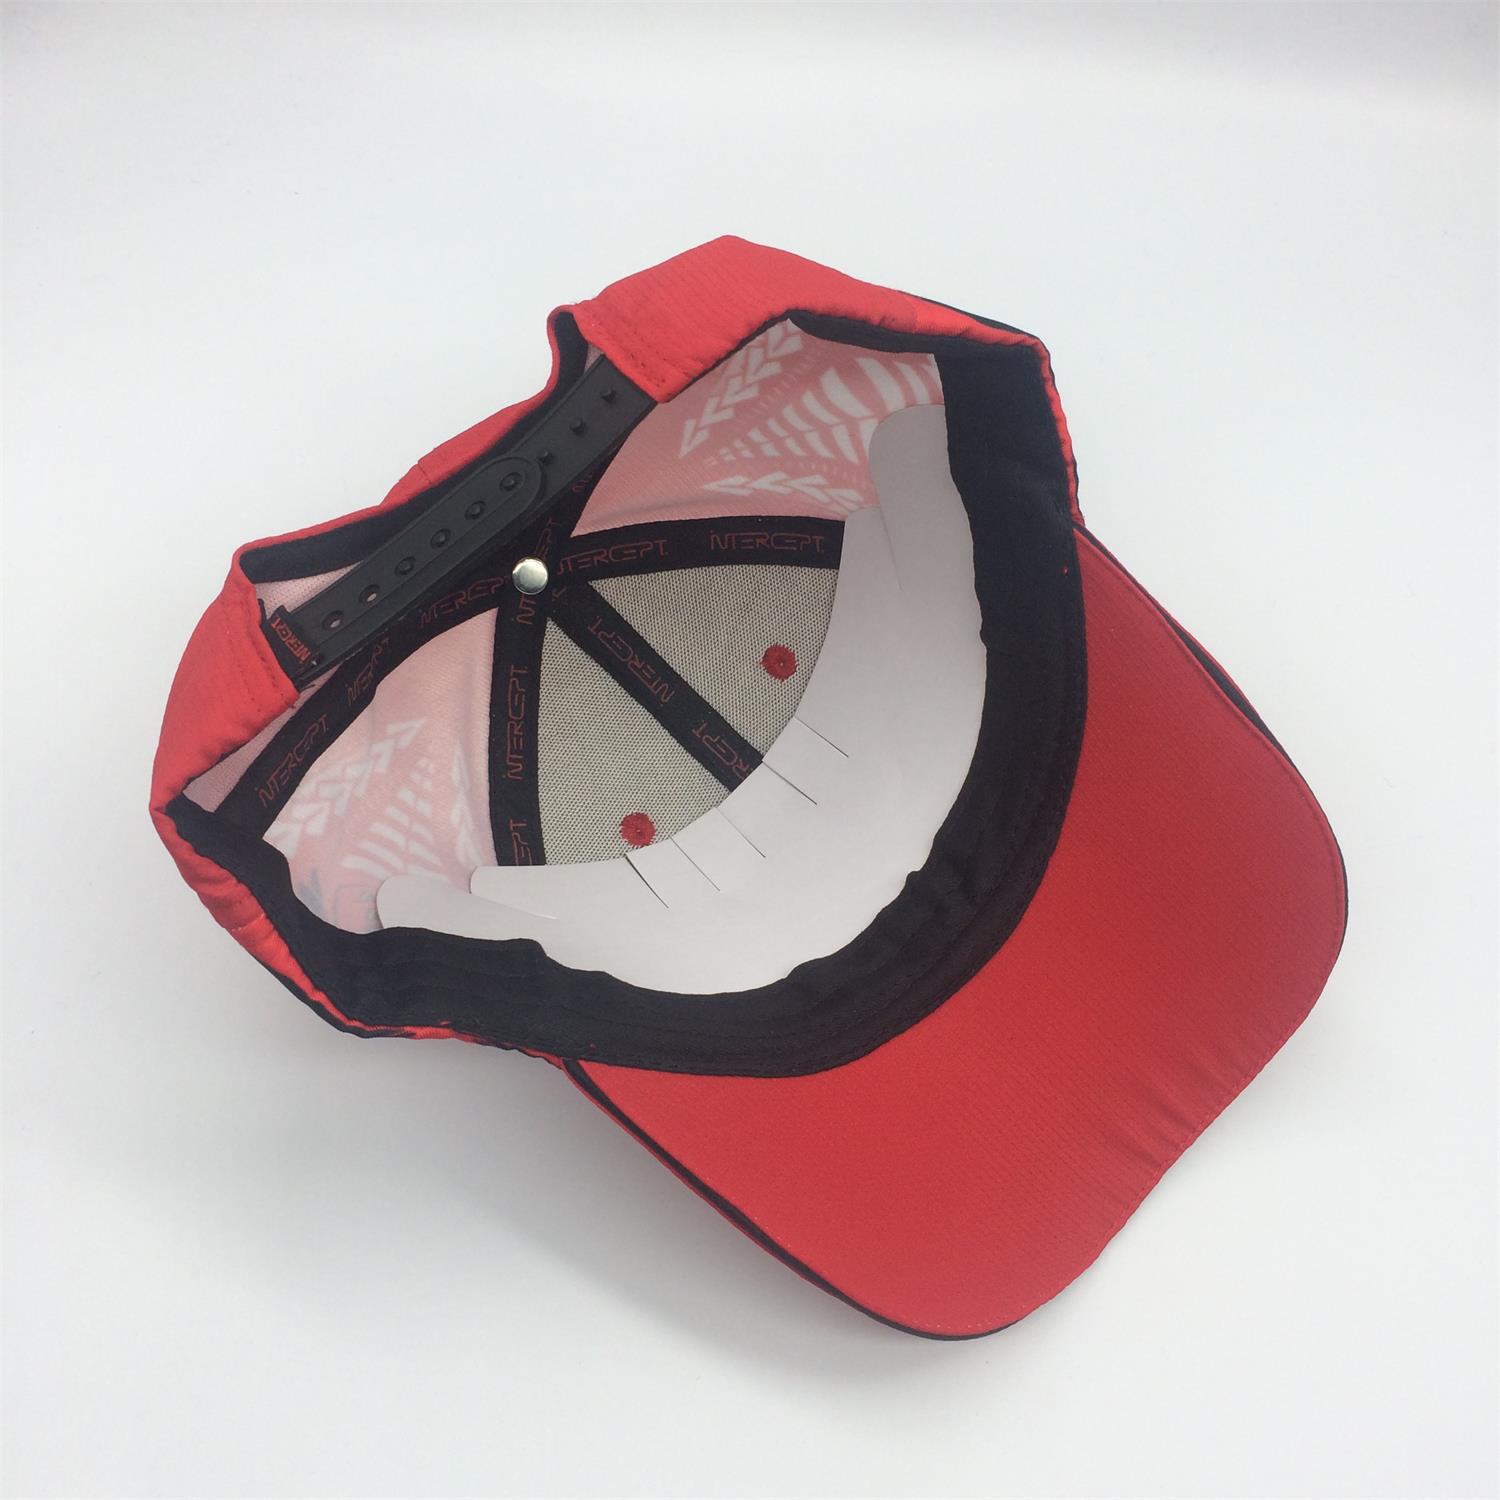 6 panel sublimated baseball cap with 3D embroidery logo